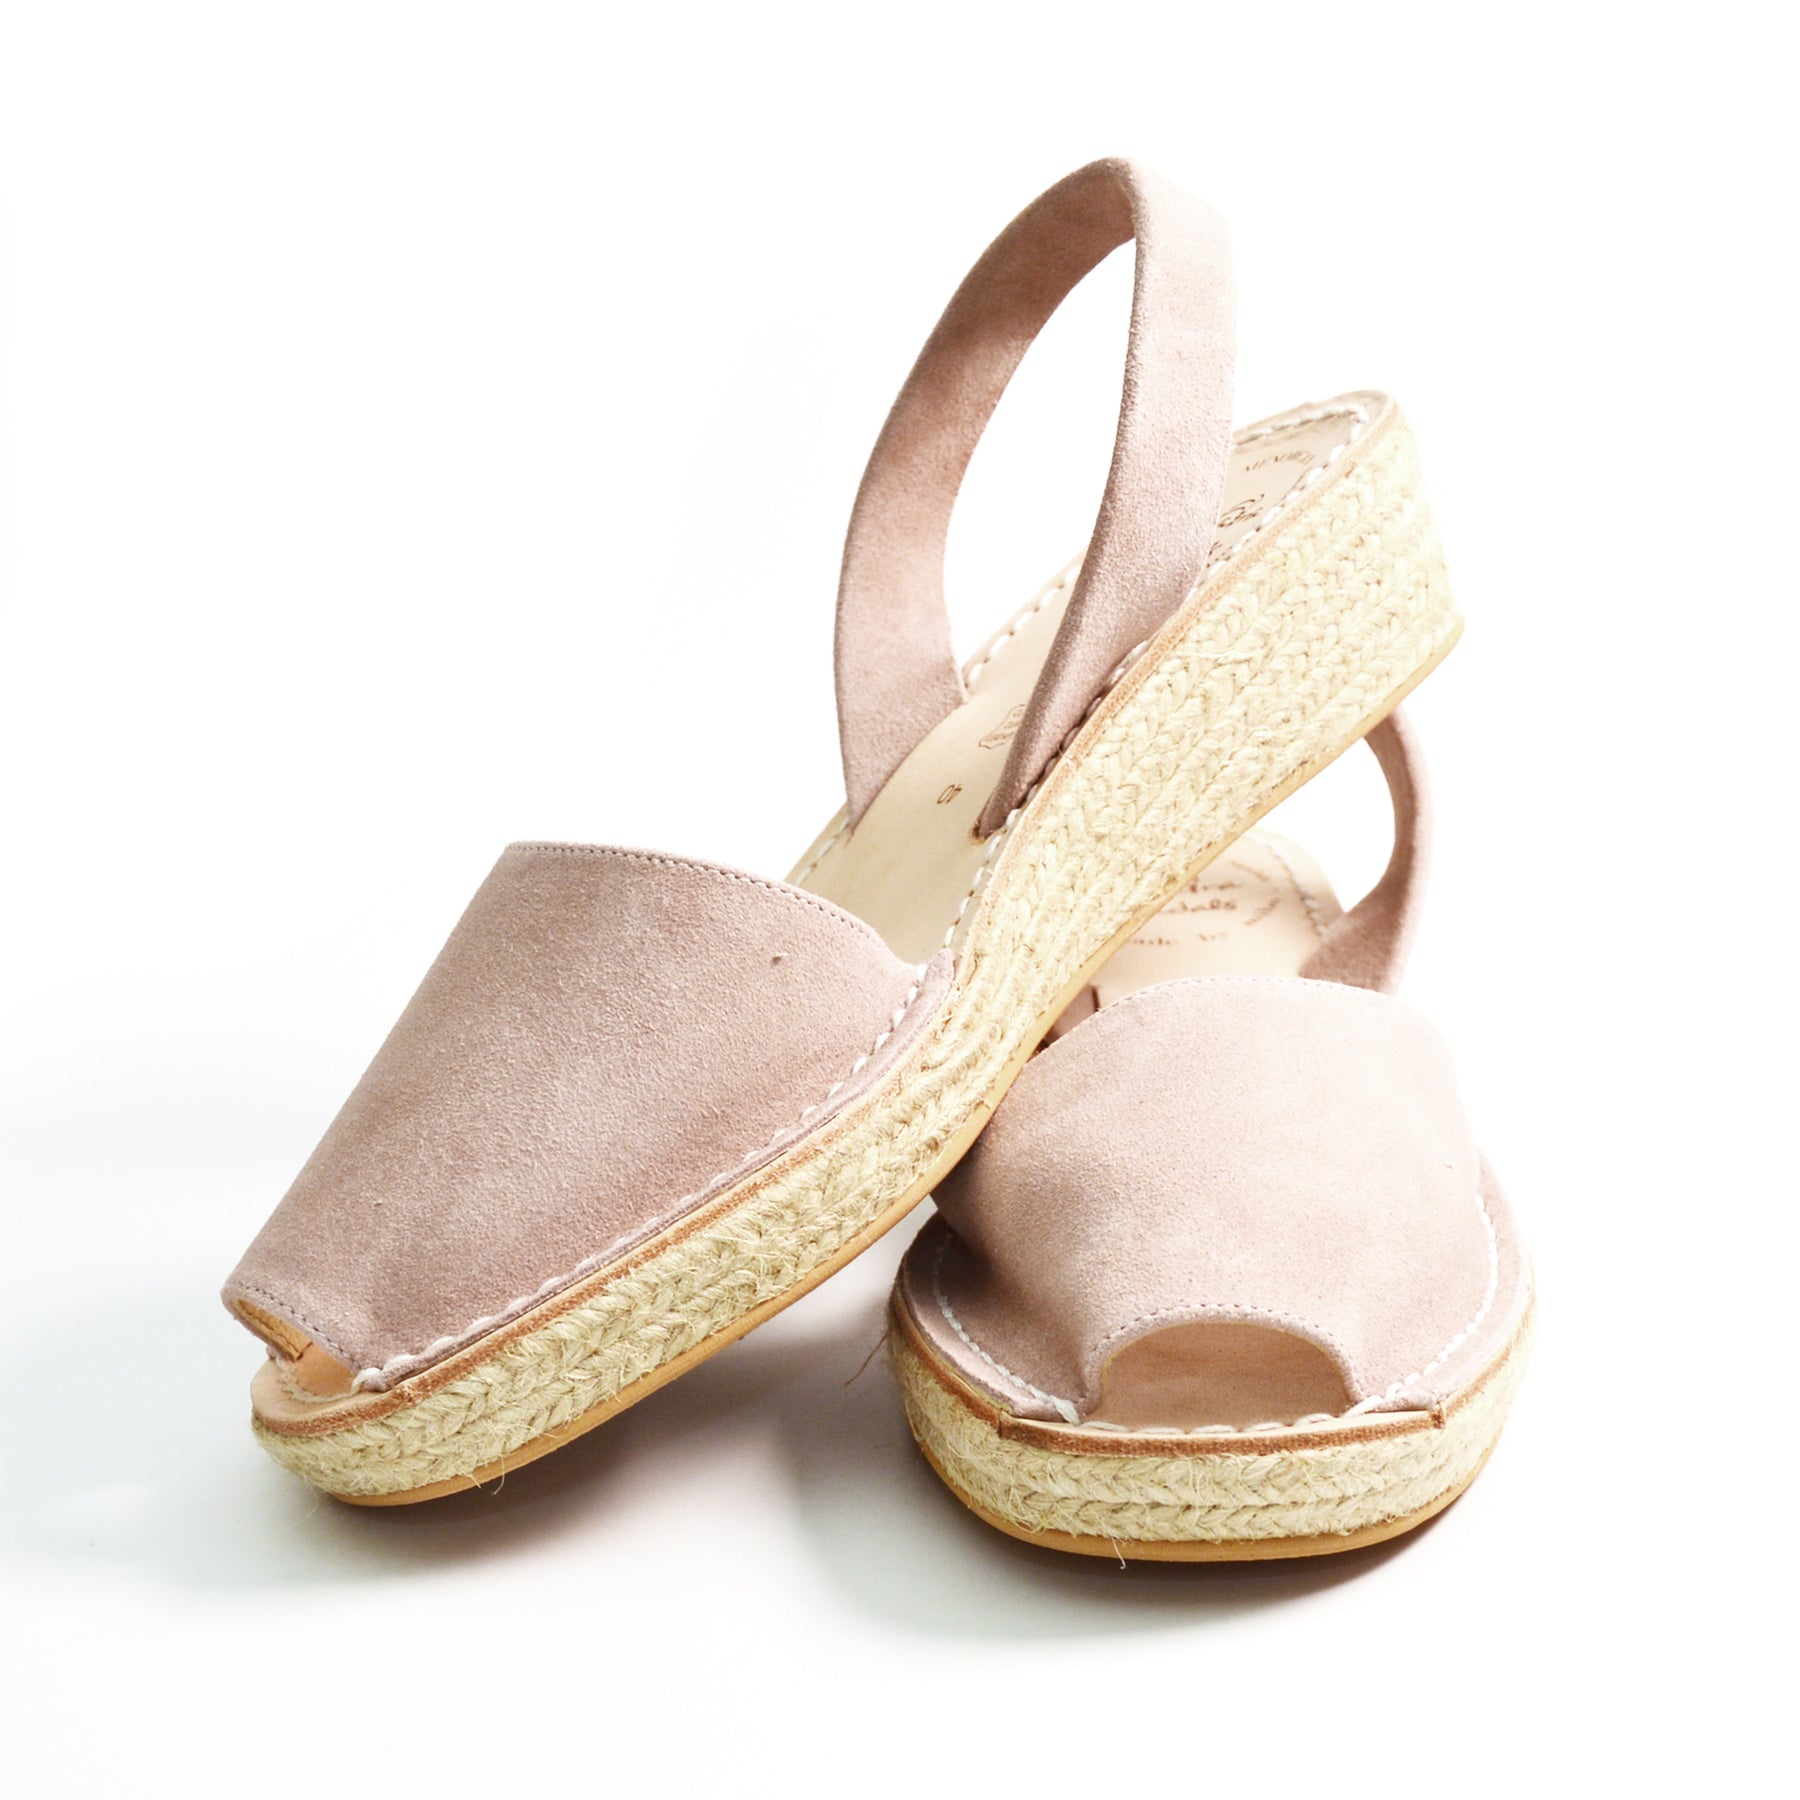 Mink suede leather pale pink low espadrille avarca wedge